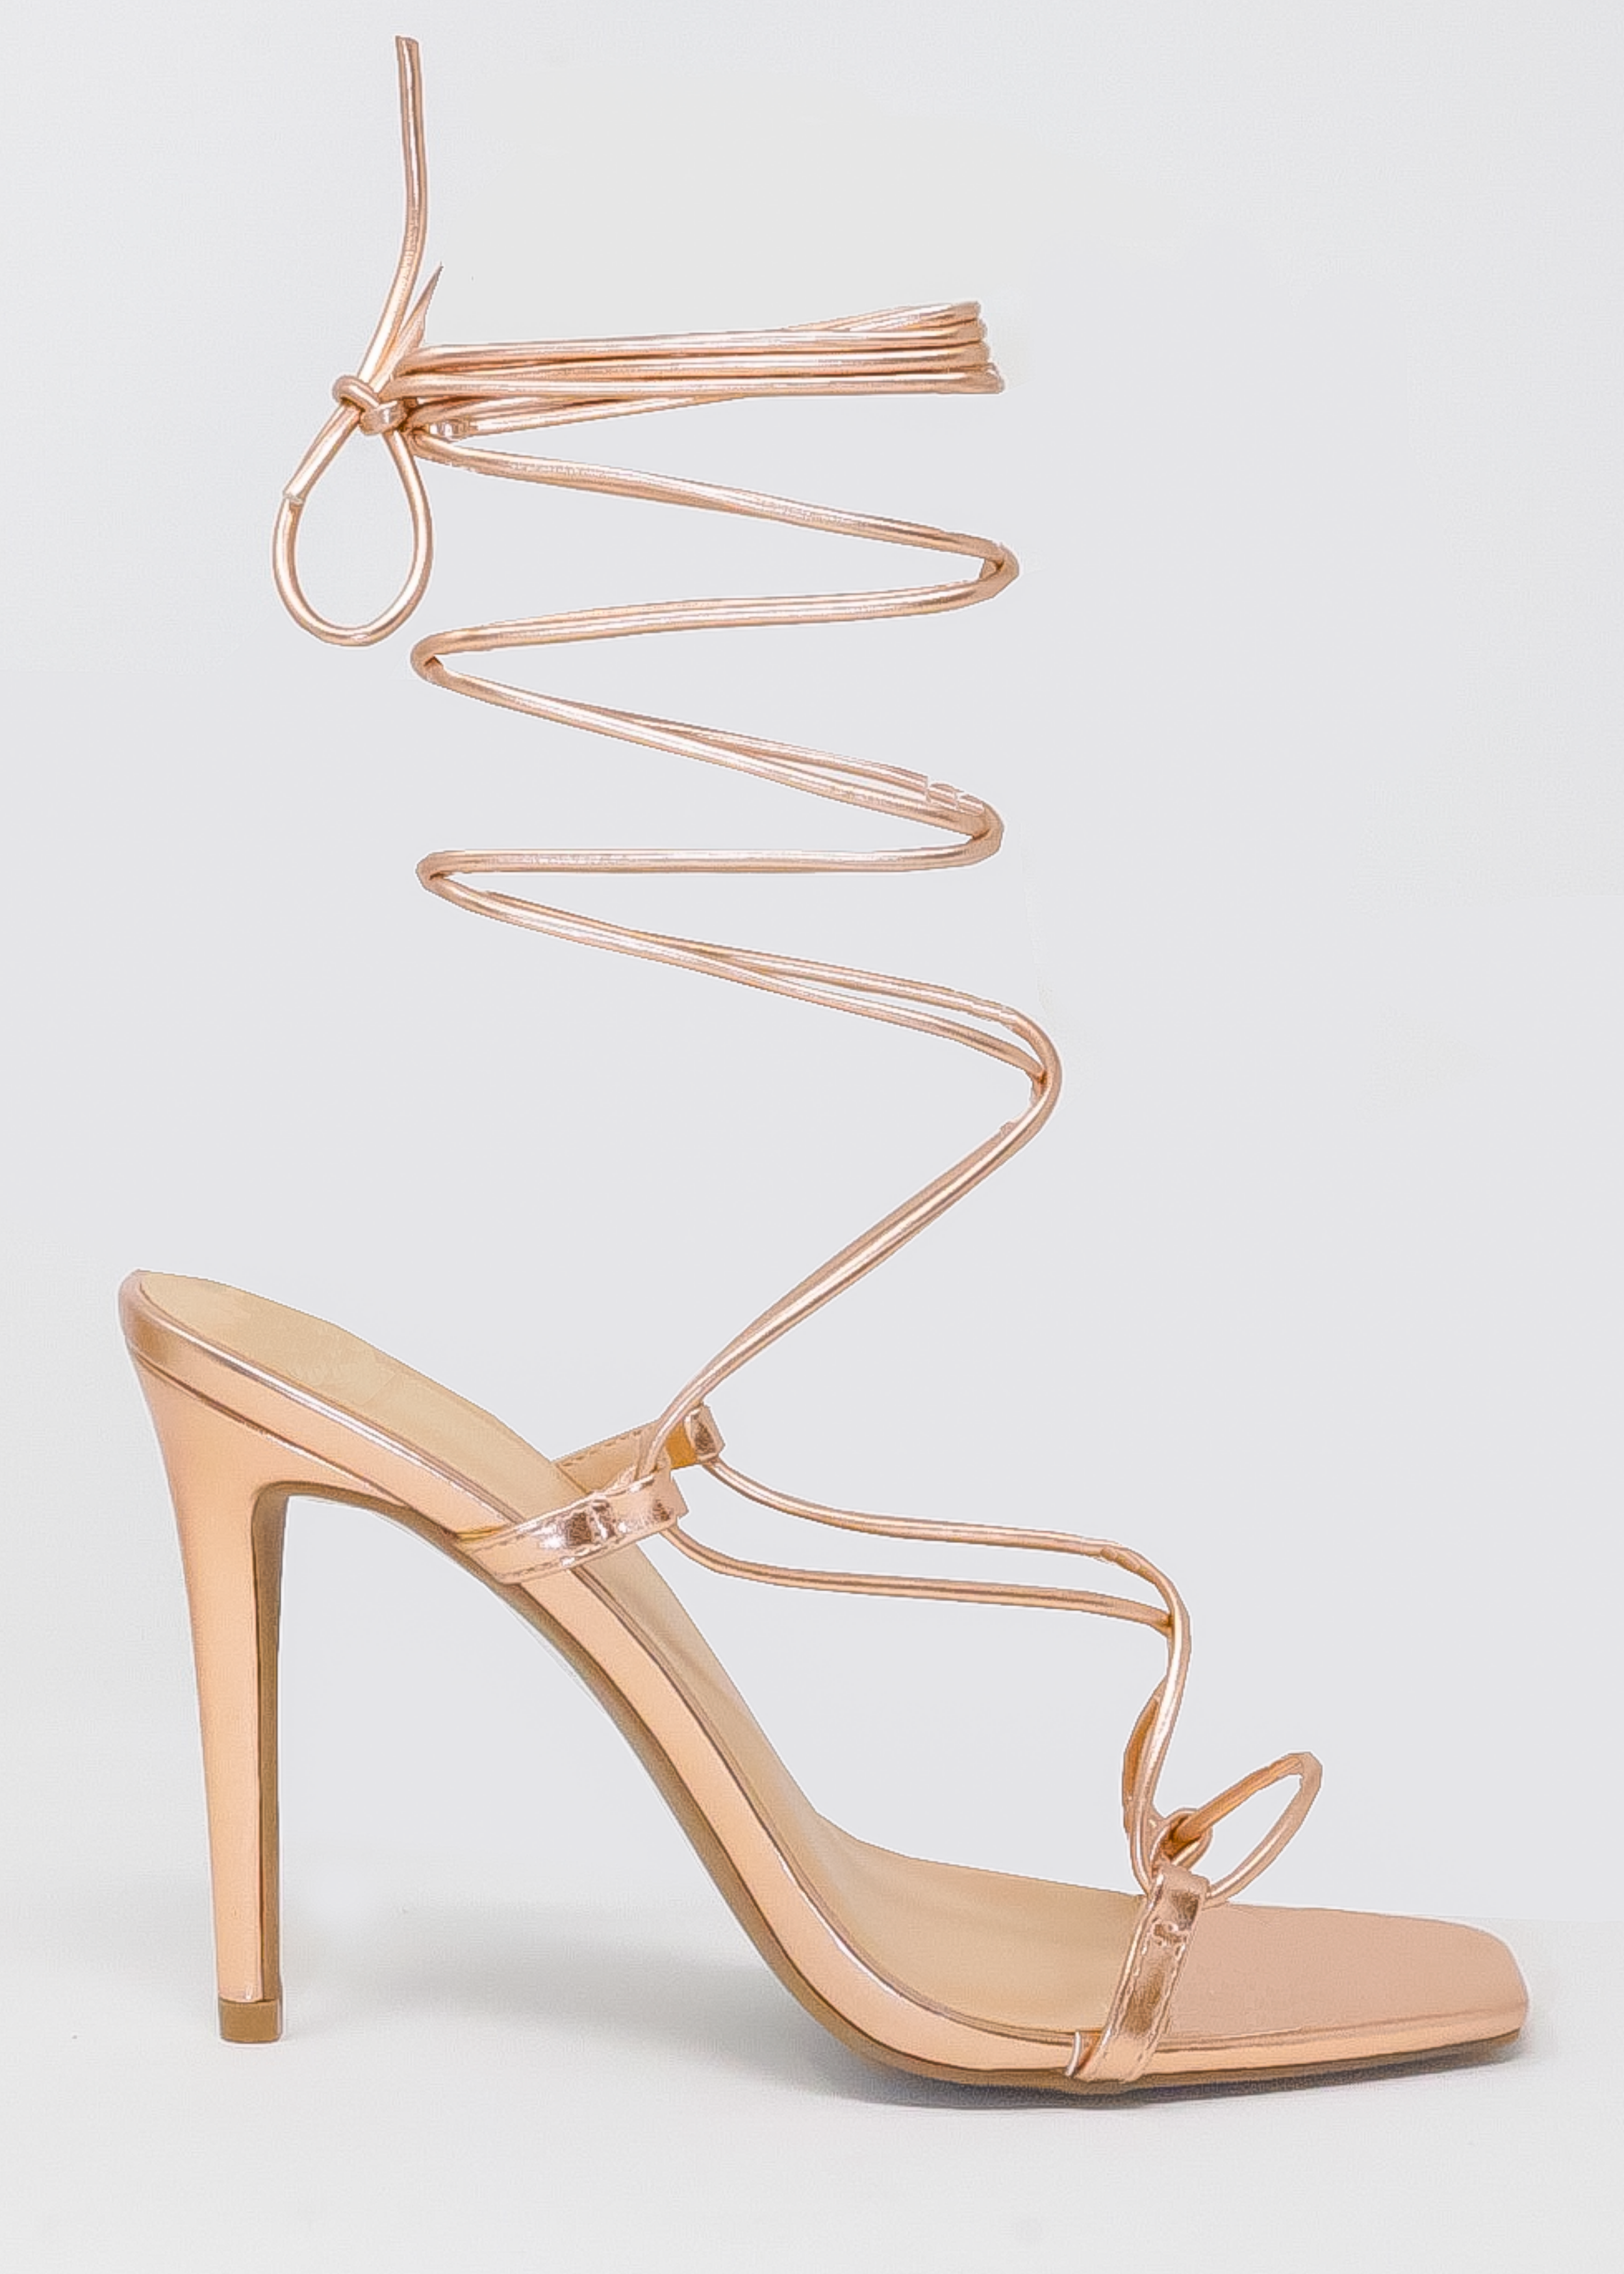 Vaneno - Nude And Gold Open Toe Lace Up Stiletto Sandal - 3 inch Heels -  Burju Shoes